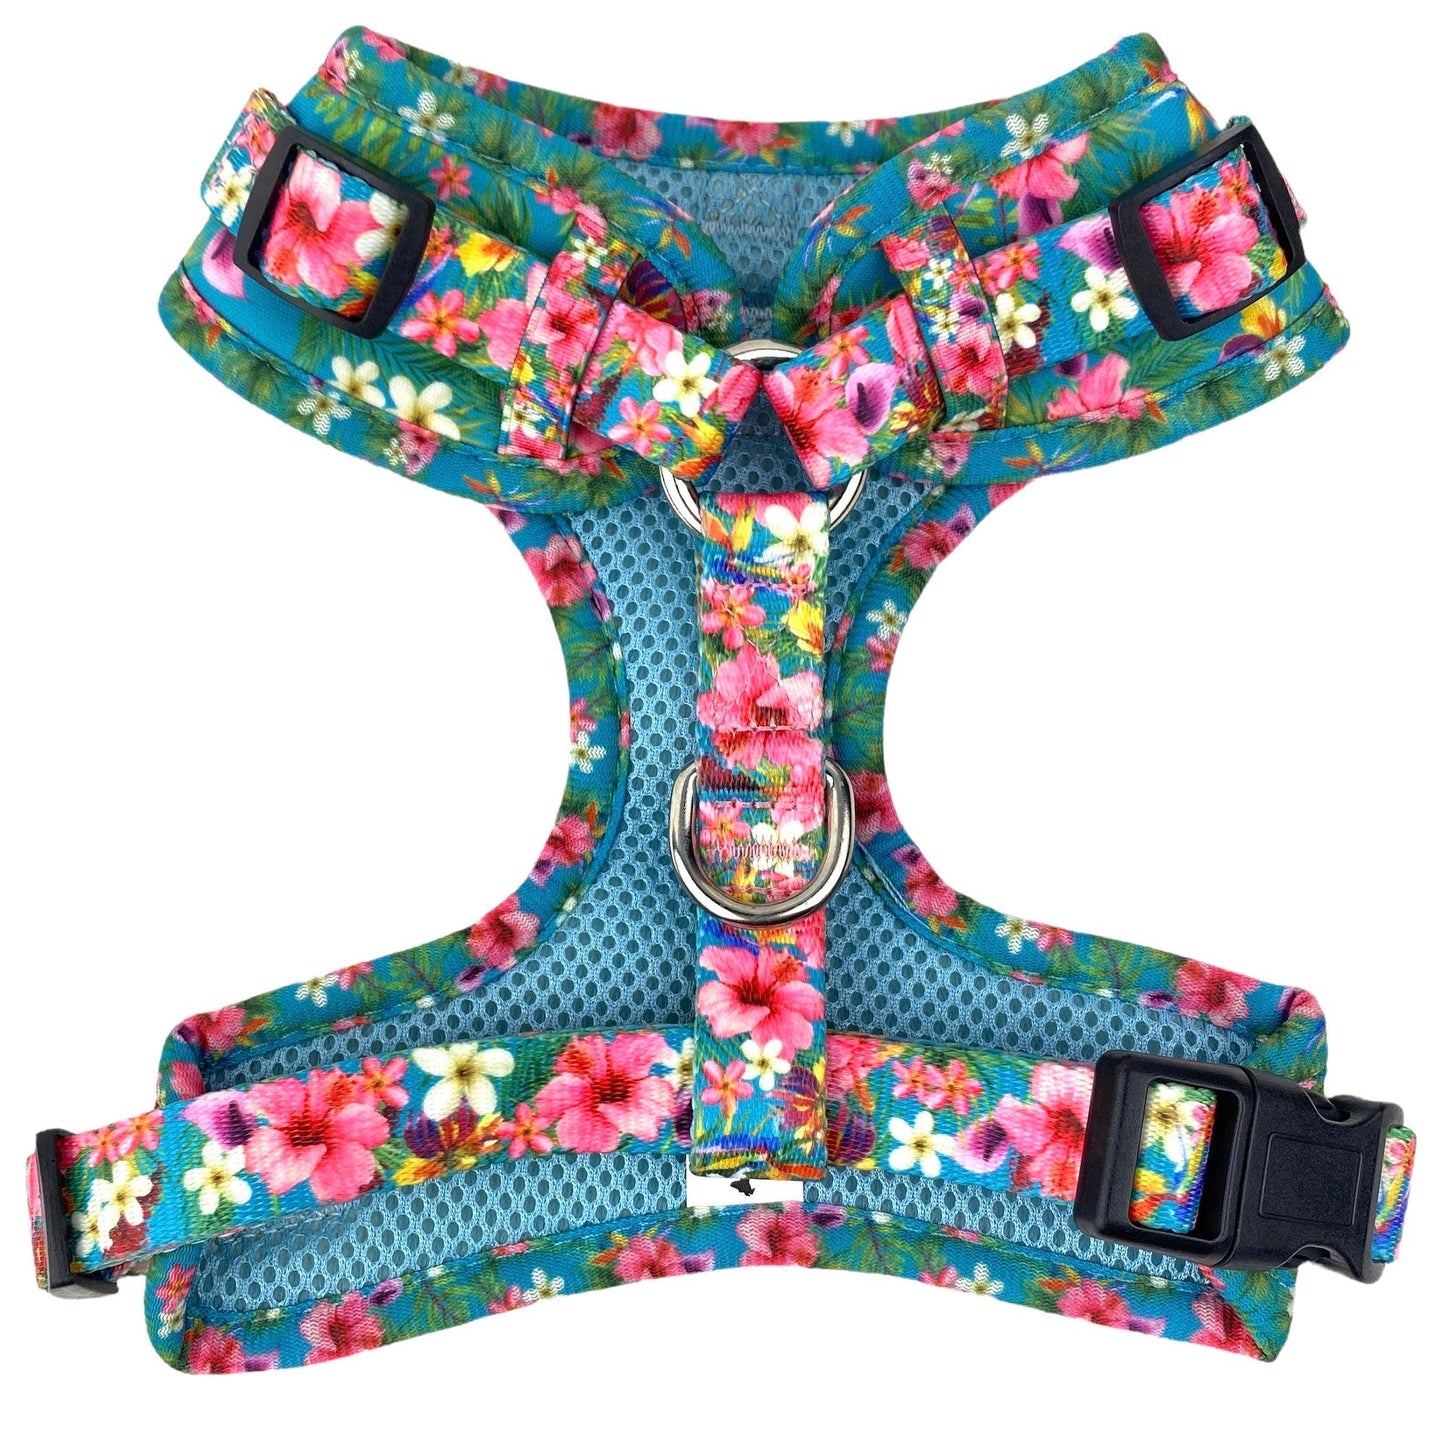 back view of our no pull adjustable dog harness fearless pet girl dog harness in floral